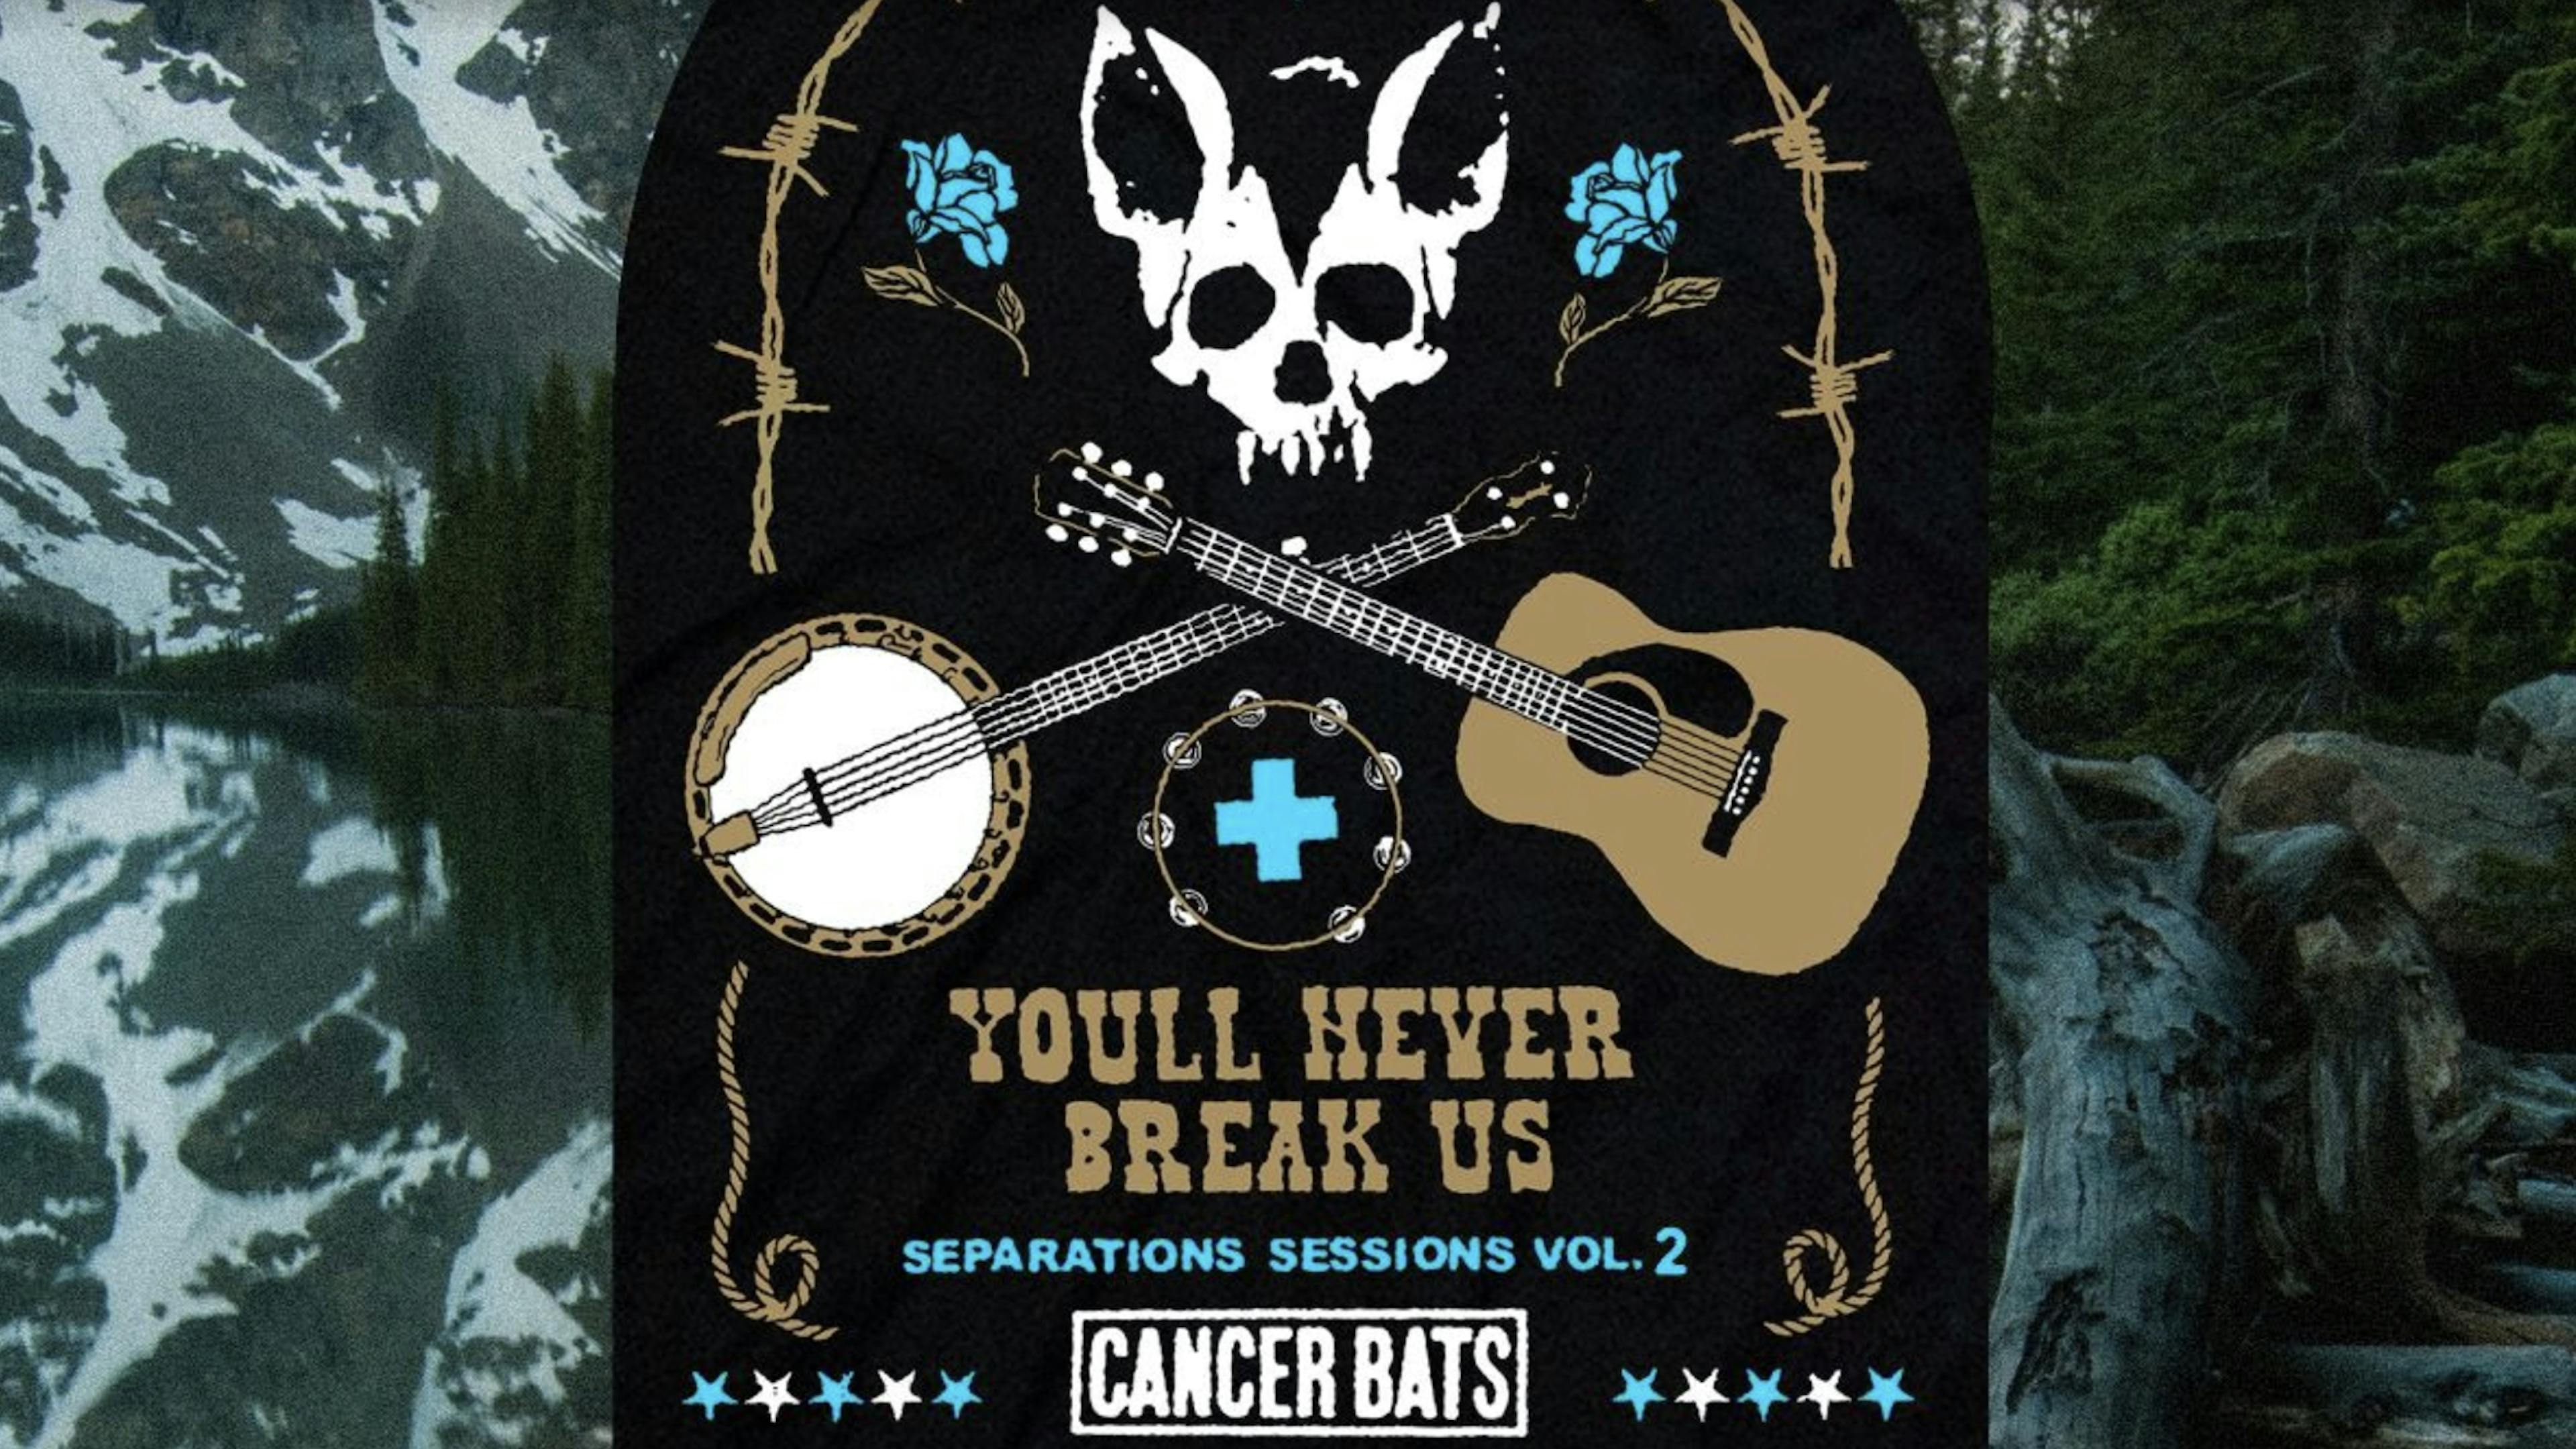 Cancer Bats have announced a new acoustic EP